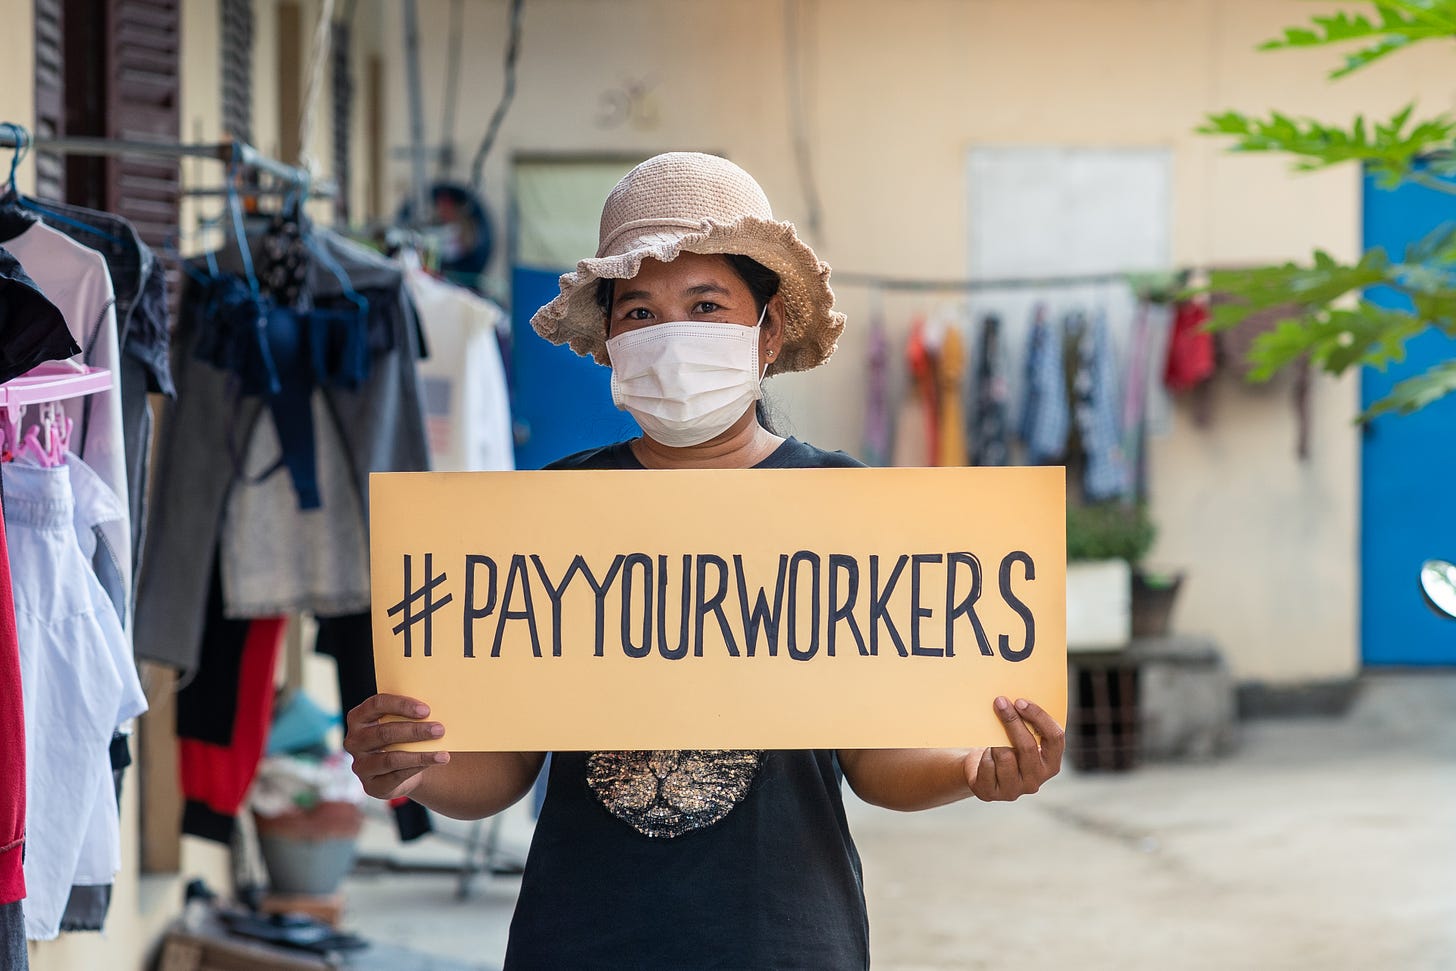 A female Cambodian garment worker wearing a face mask holds up a sign saying #PayYourWorkers in reference to the international campaign.